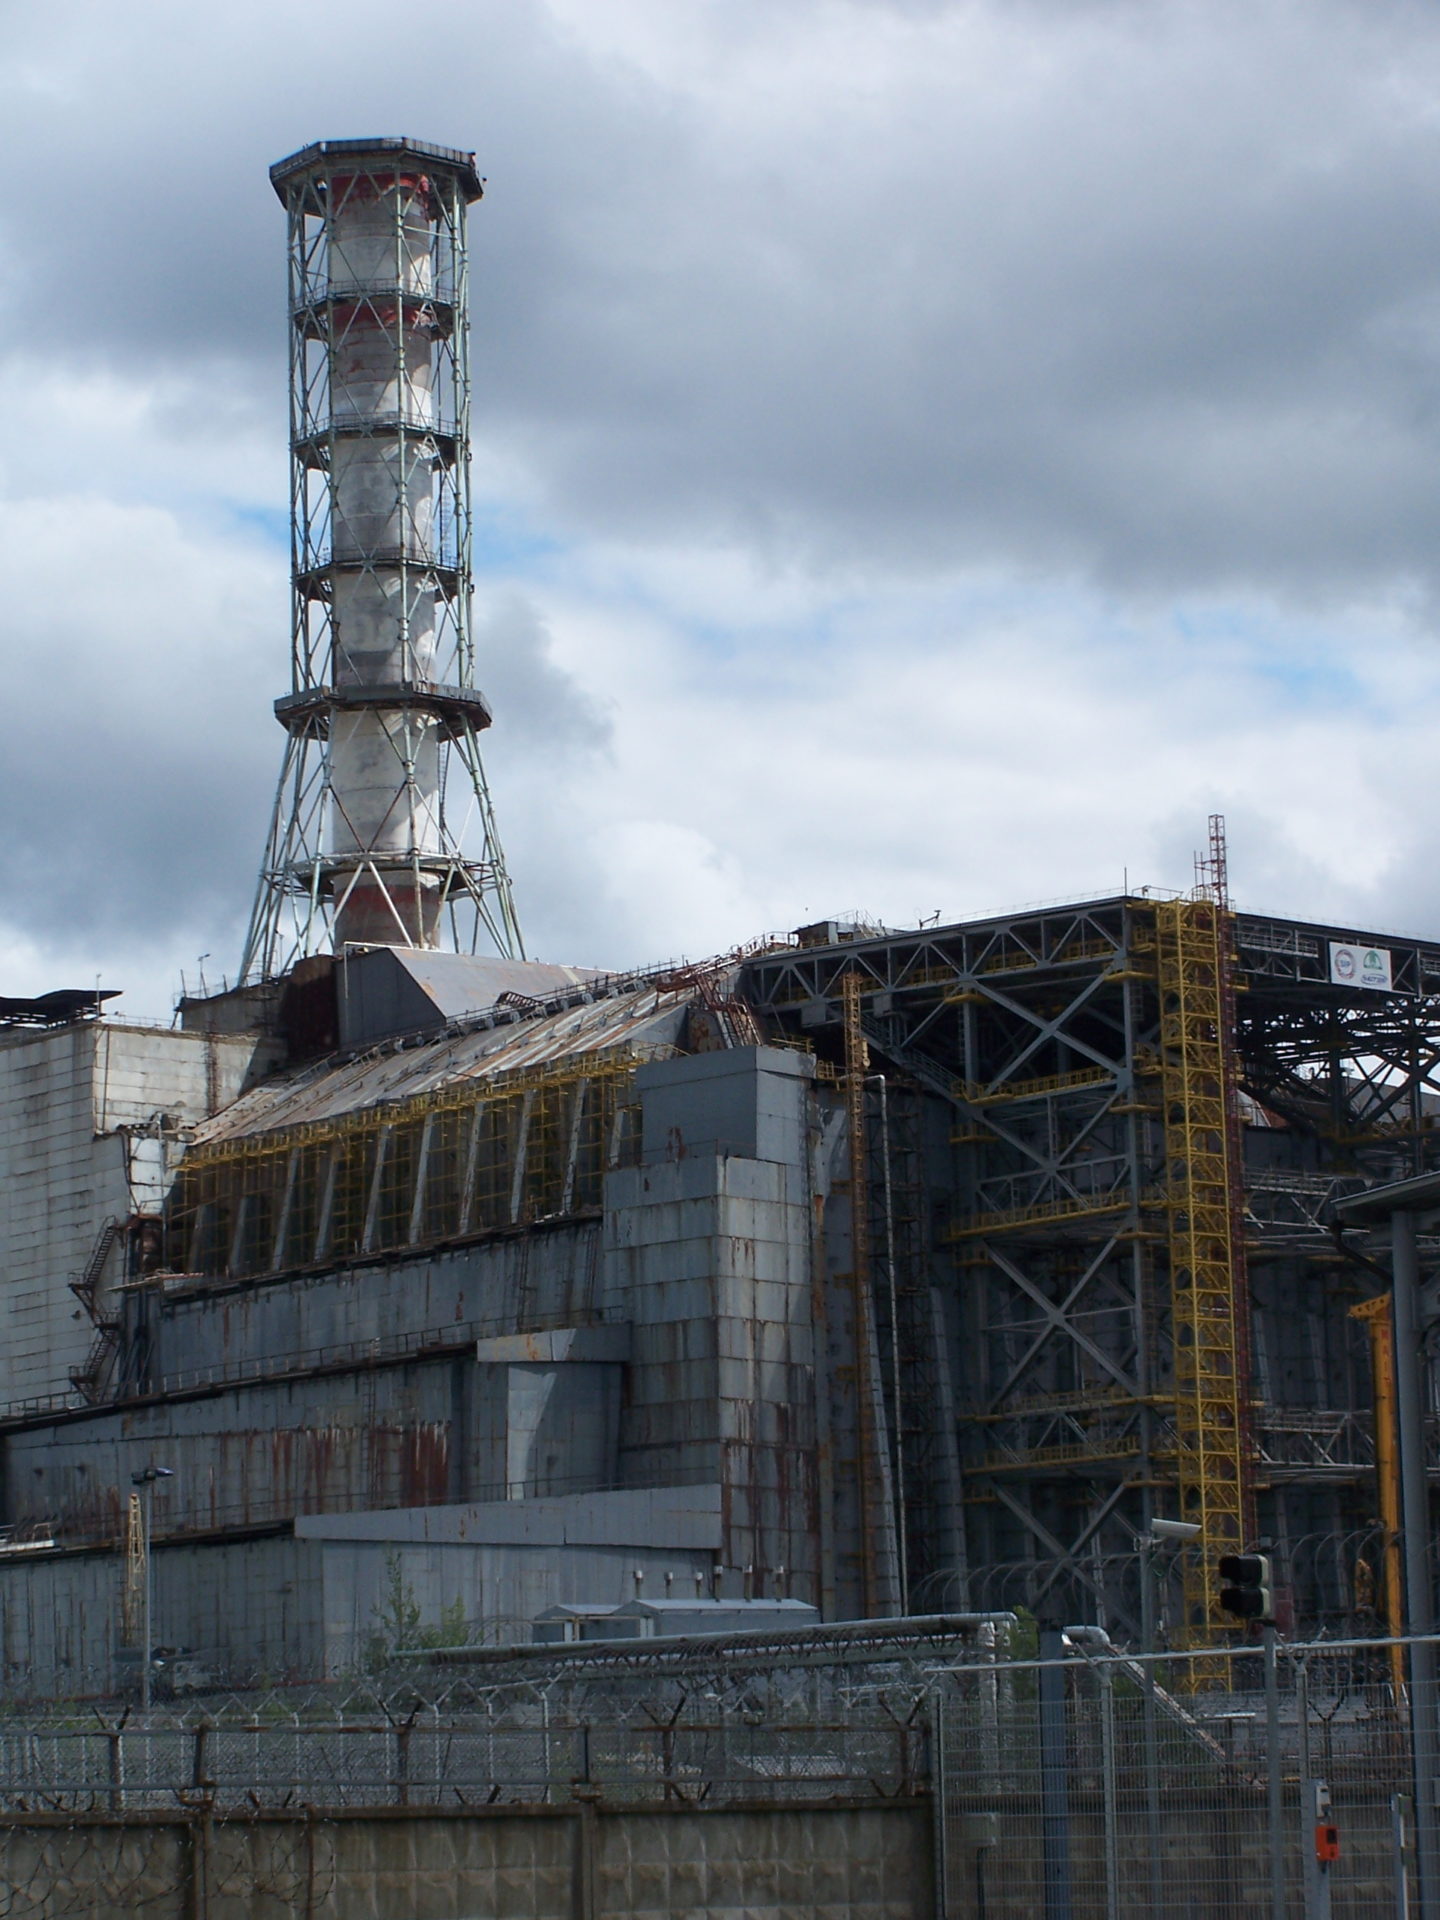 Chernobyl pictures